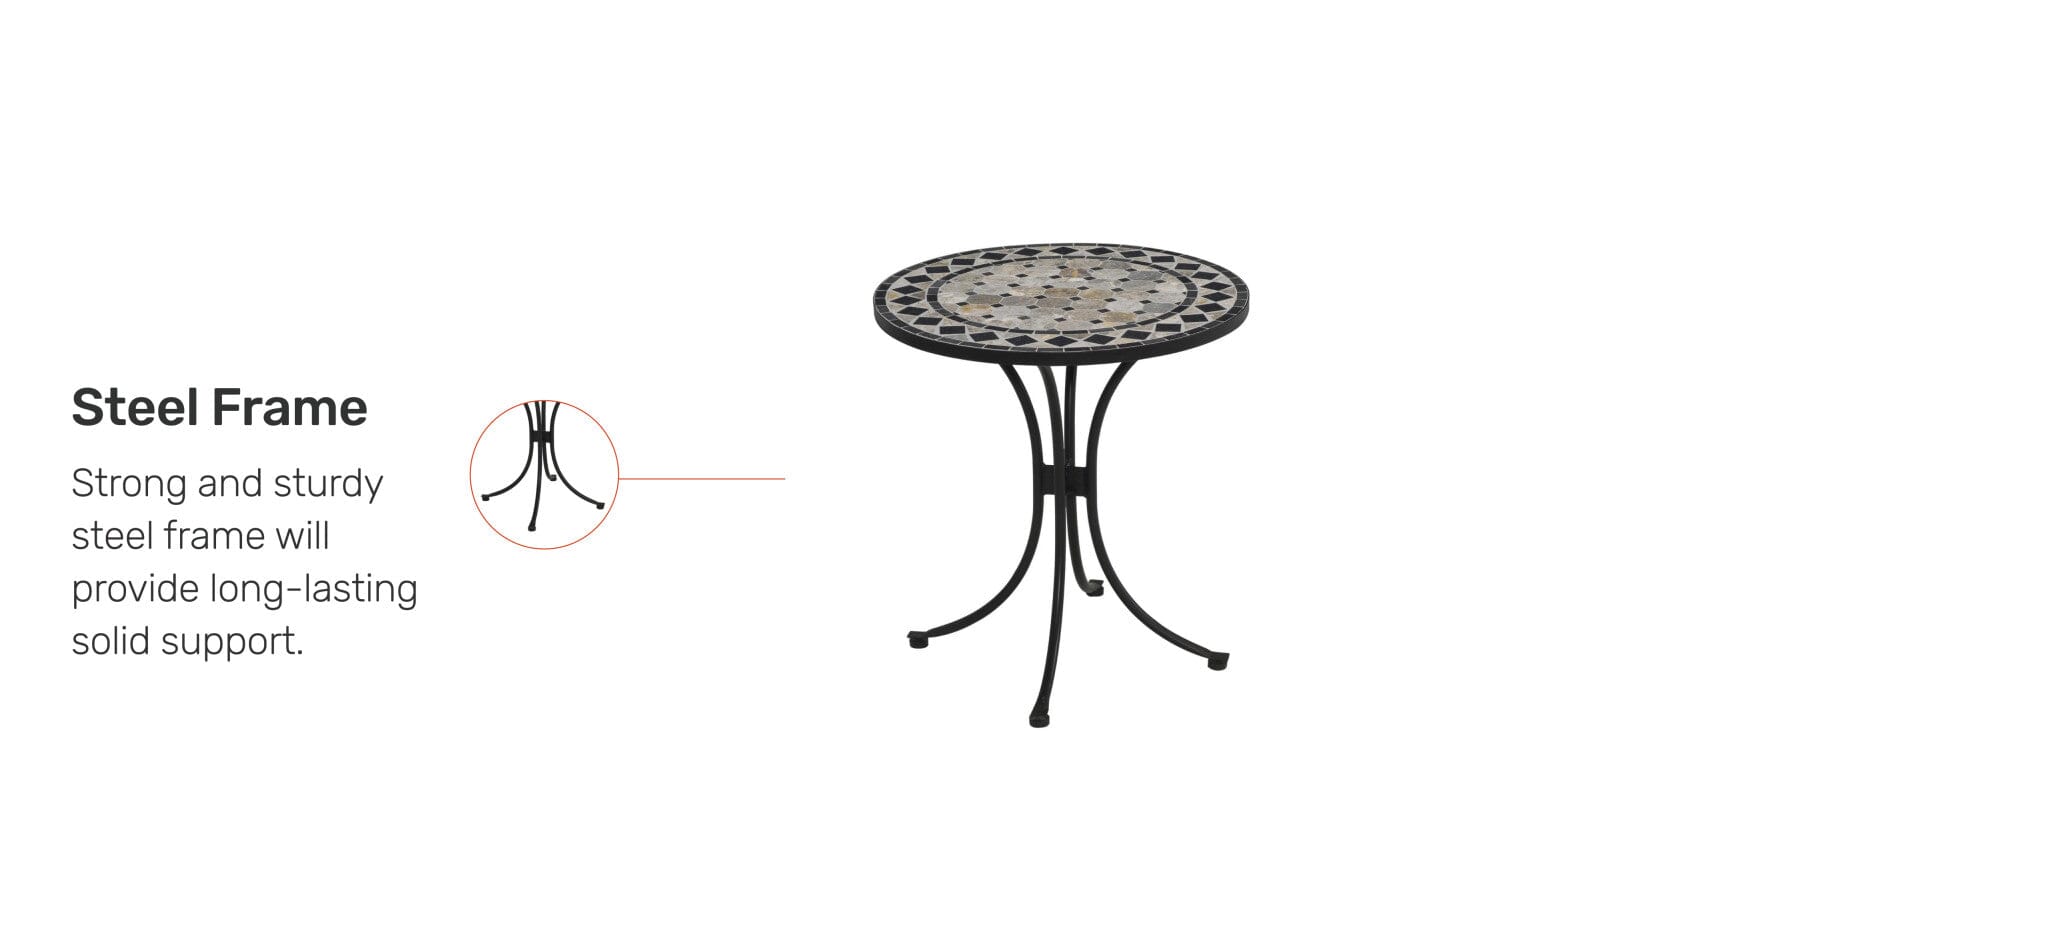 Traditional Outdoor Bistro Table By Laguna Outdoor Dining Table Laguna